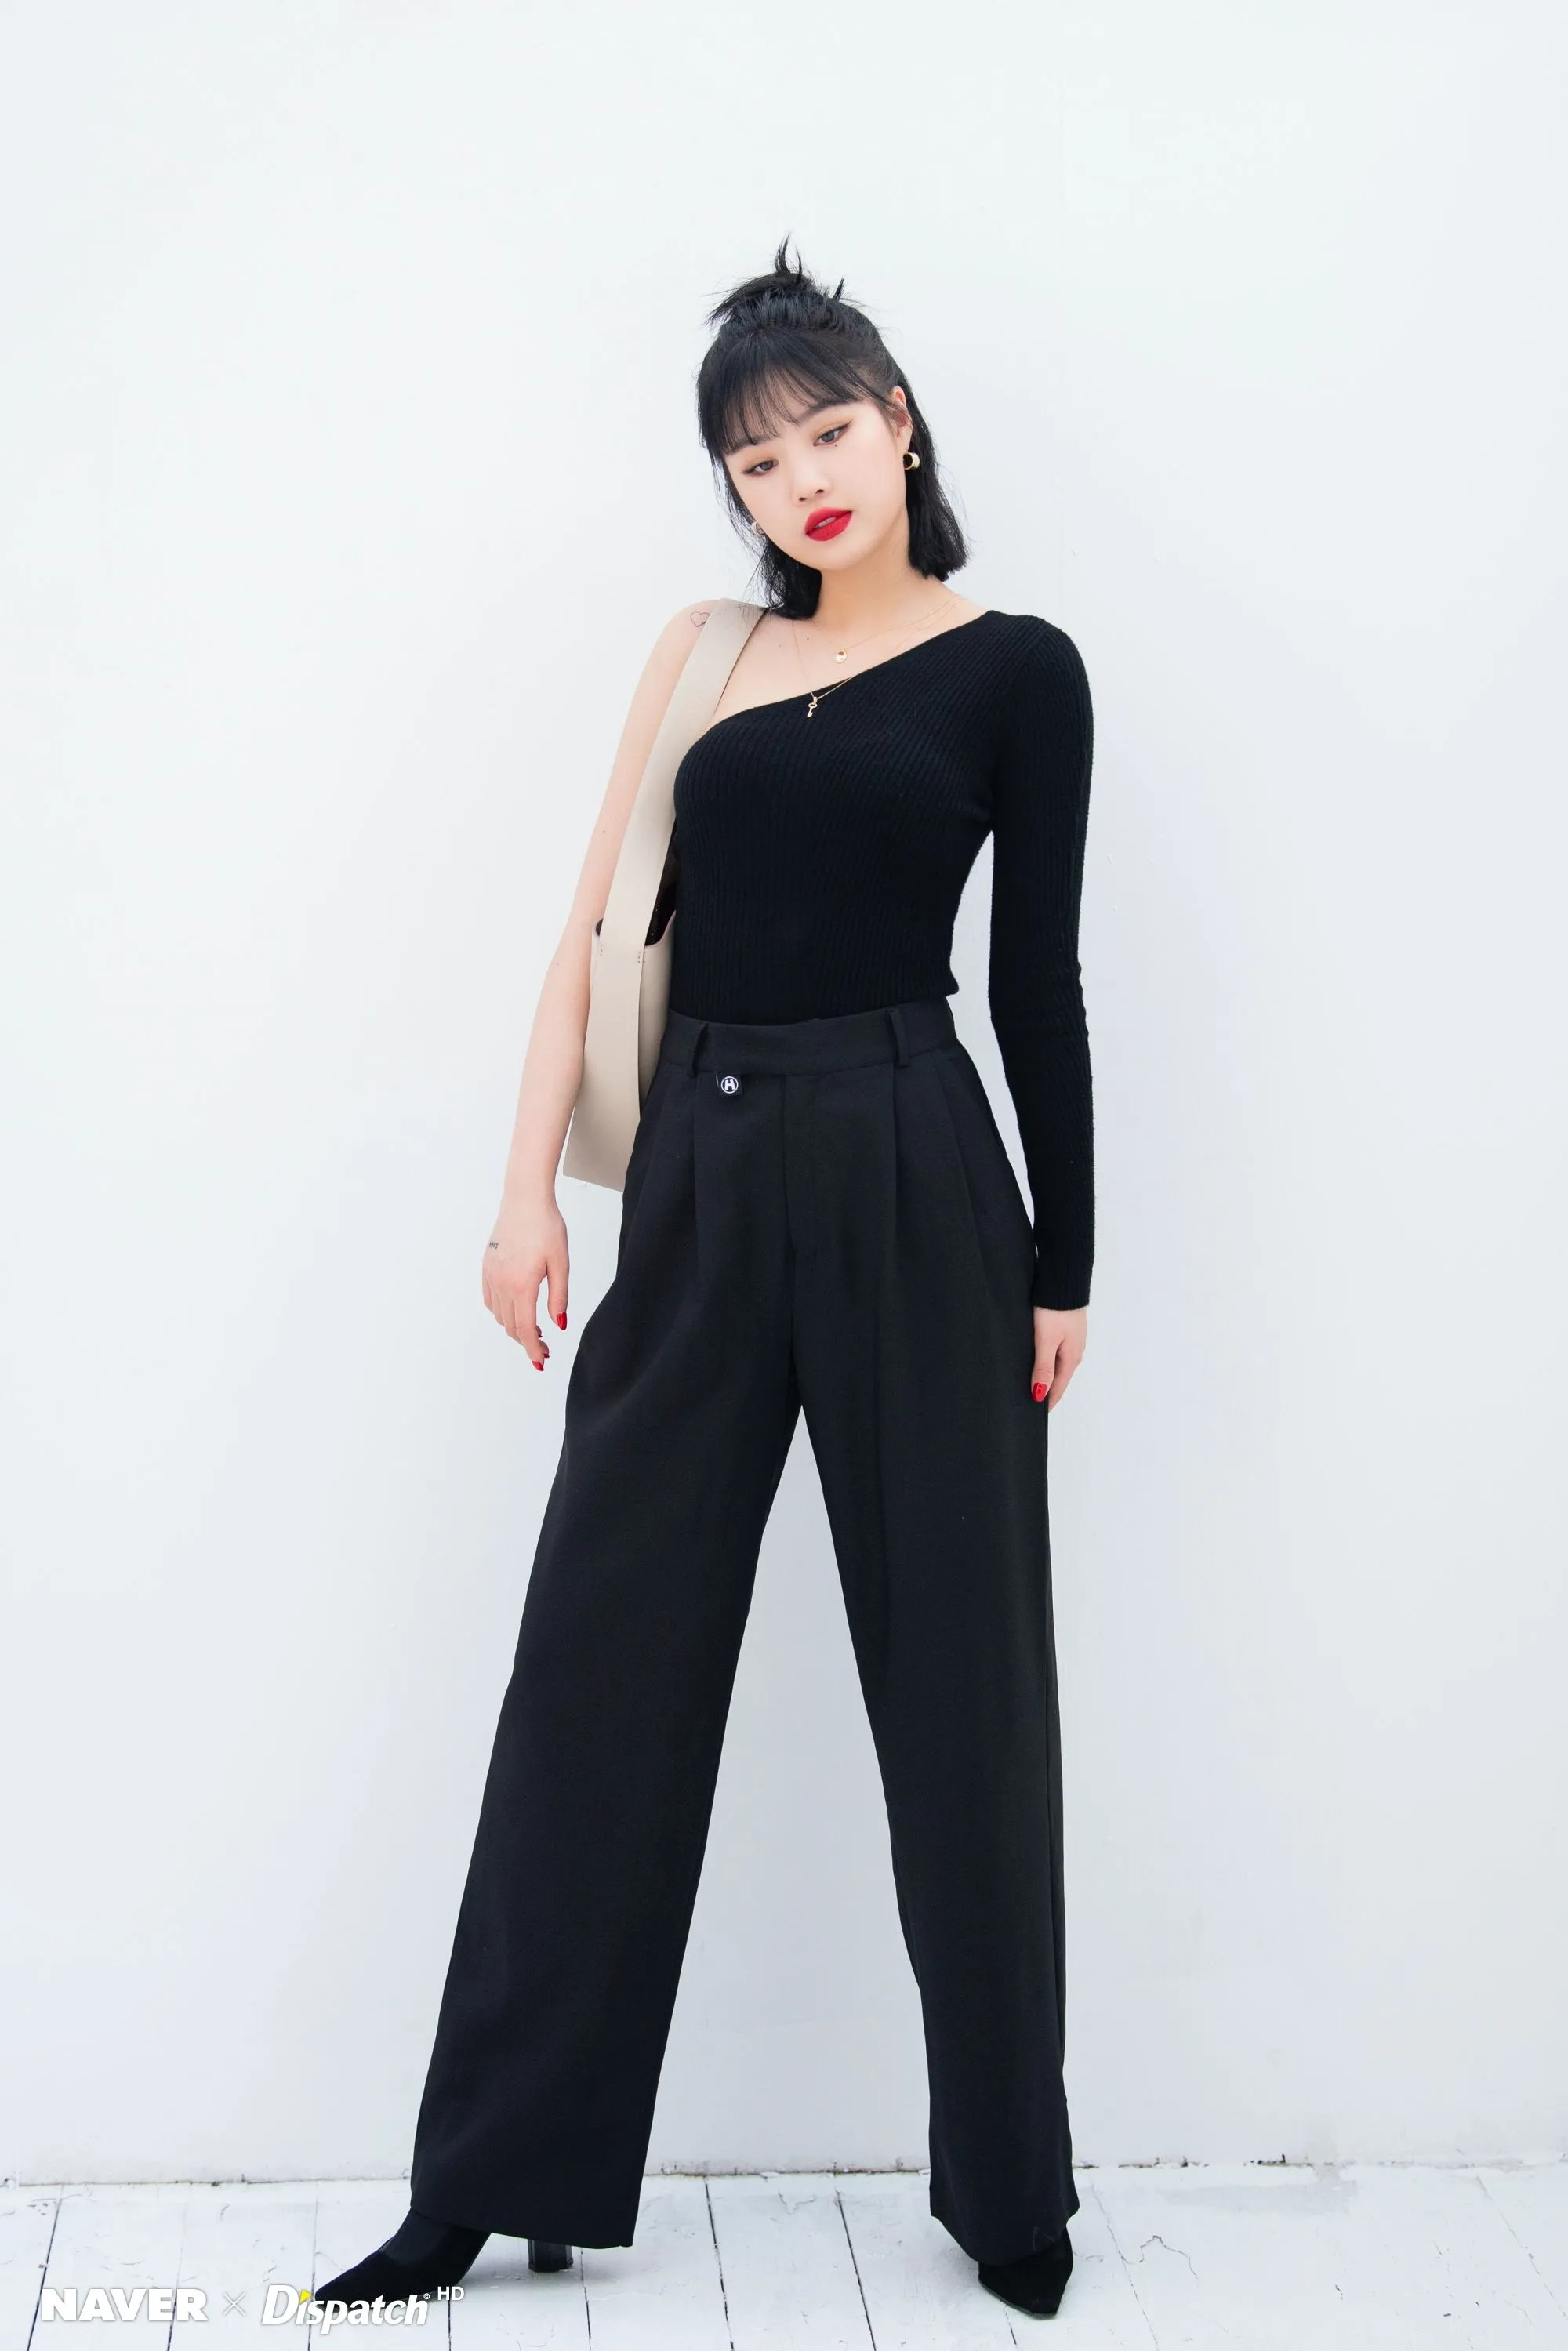 (G)I-DLE Soojin - LIKE by Dispatch Pictorial Shooting by Naver x ...